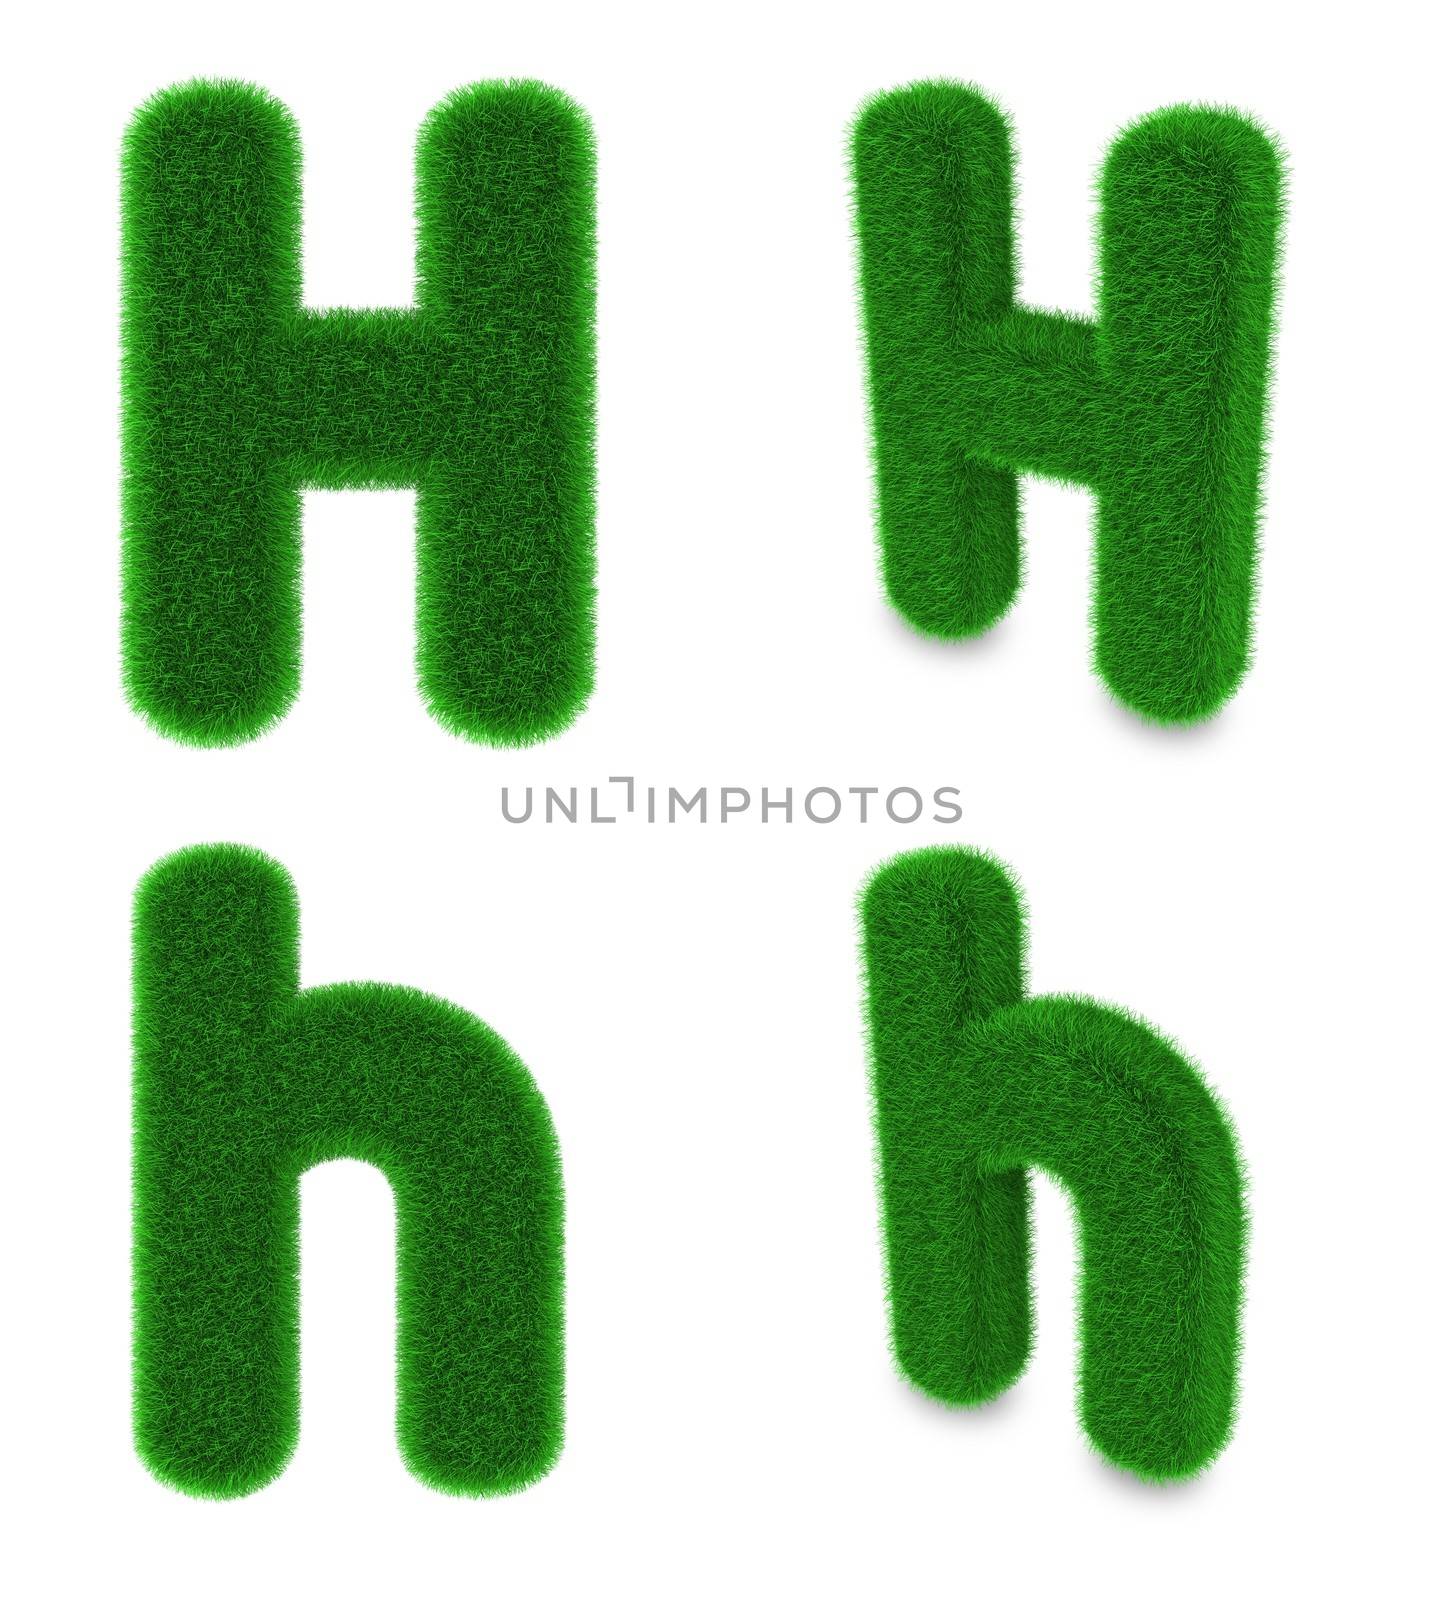 Letter H made of grass by Harvepino